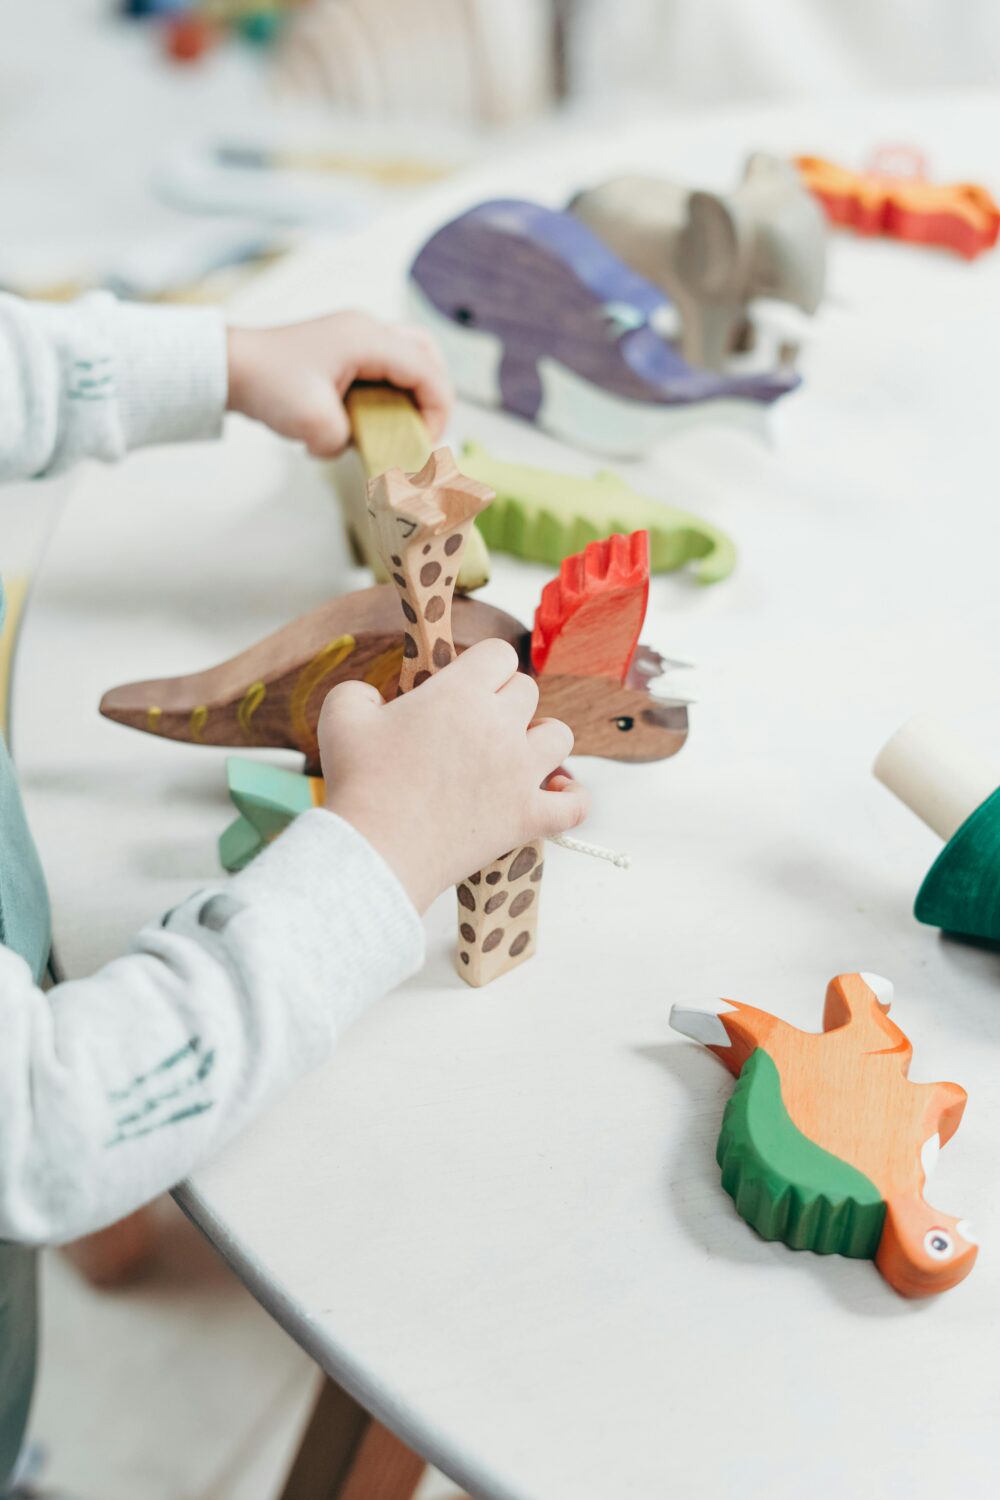 Hands of a toddler playing with wooden animals and dinosaurs. (Photo by cottonbro studio via Pexels)